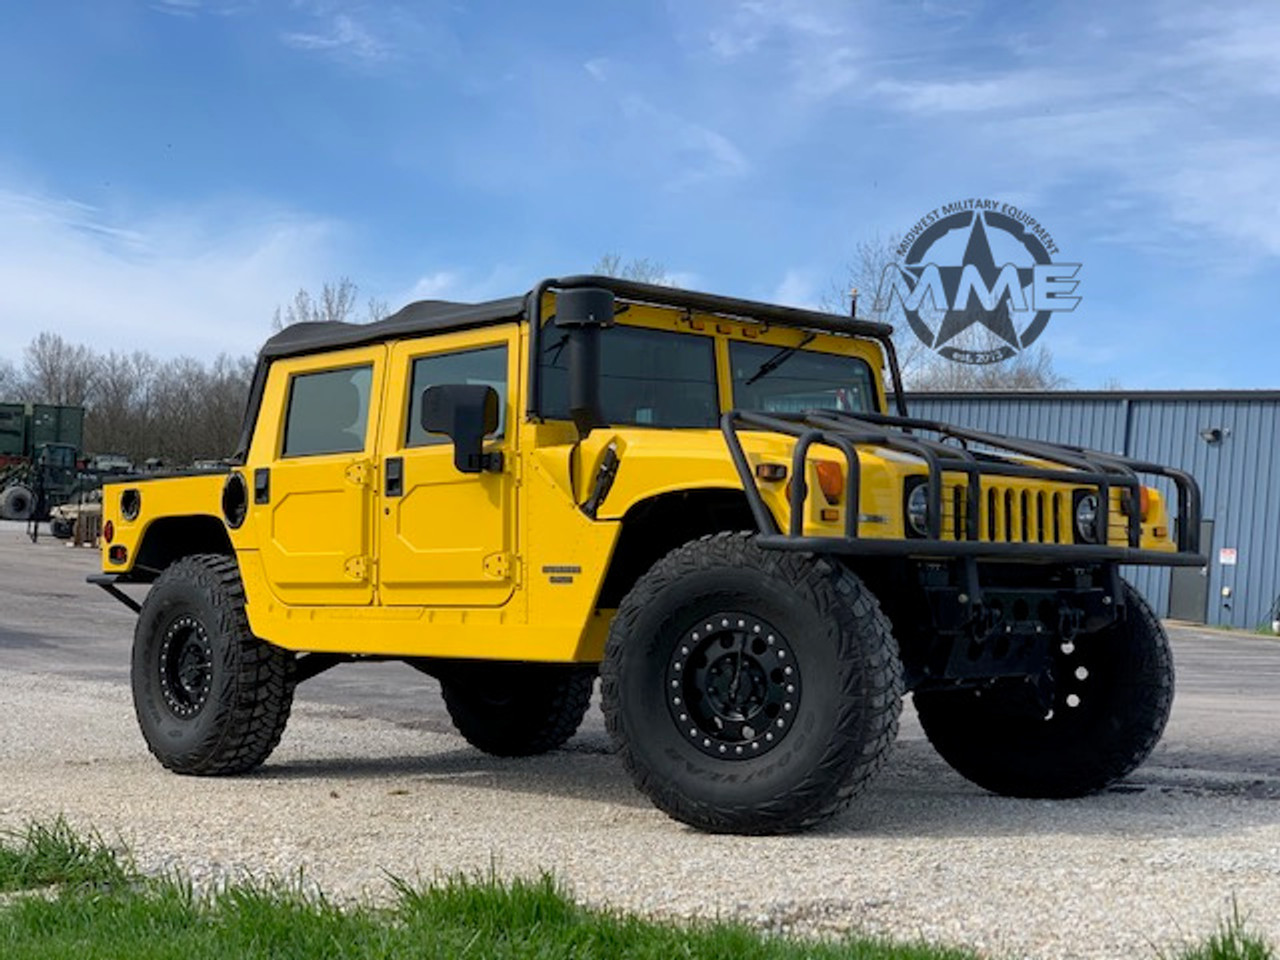 1998 AM GENERAL HUMMER H1 OPEN TOP TURBO DIESEL - Midwest Military Equipment